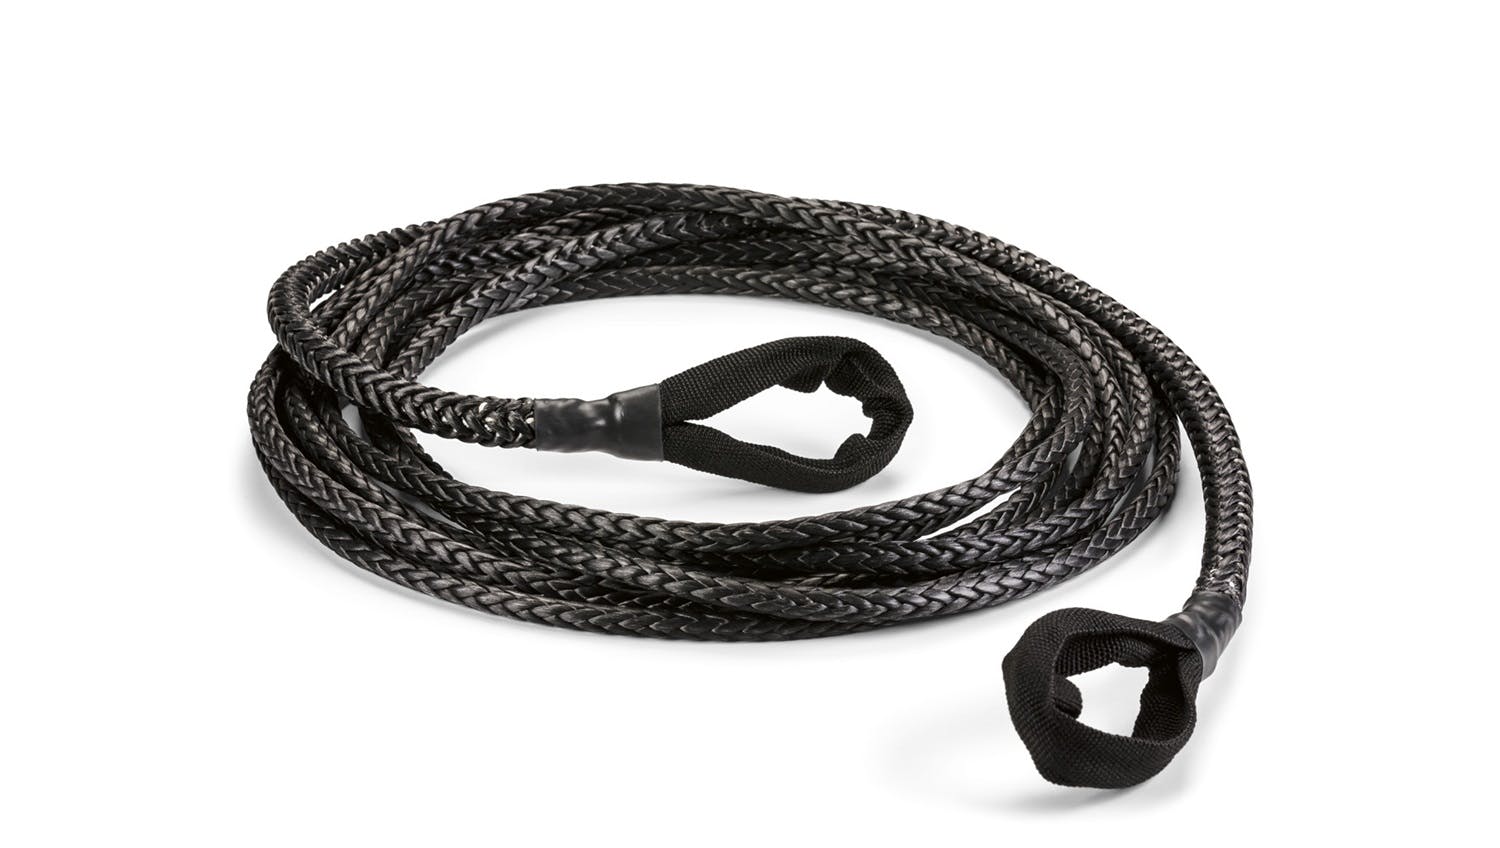 WARN 93118 Standard Duty and Spydura® Synthetic Rope and Extensions